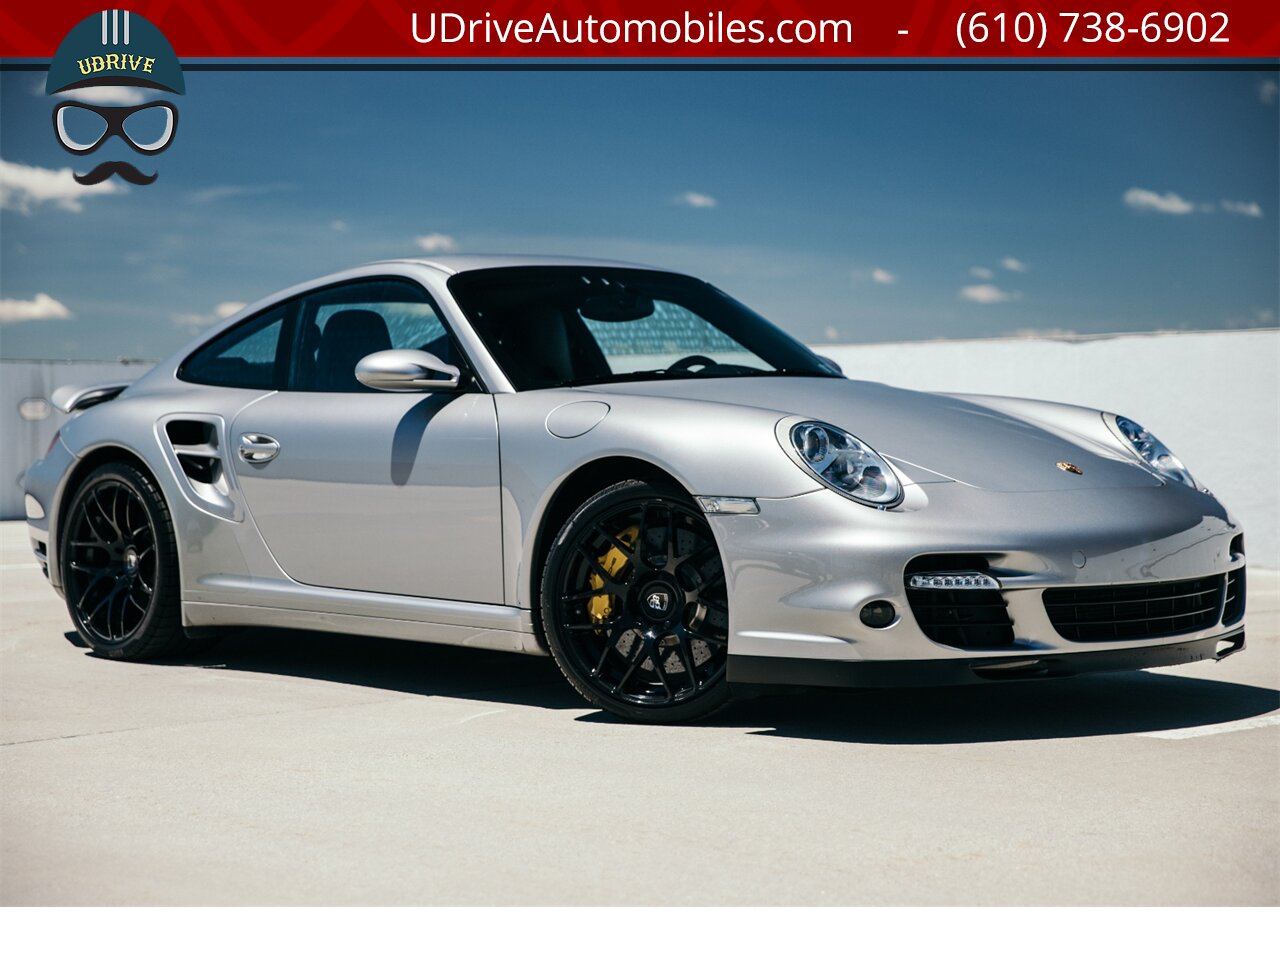 2008 Porsche 911 6 Speed Manual Turbo 997 PCCB's $149k MSRP   - Photo 4 - West Chester, PA 19382